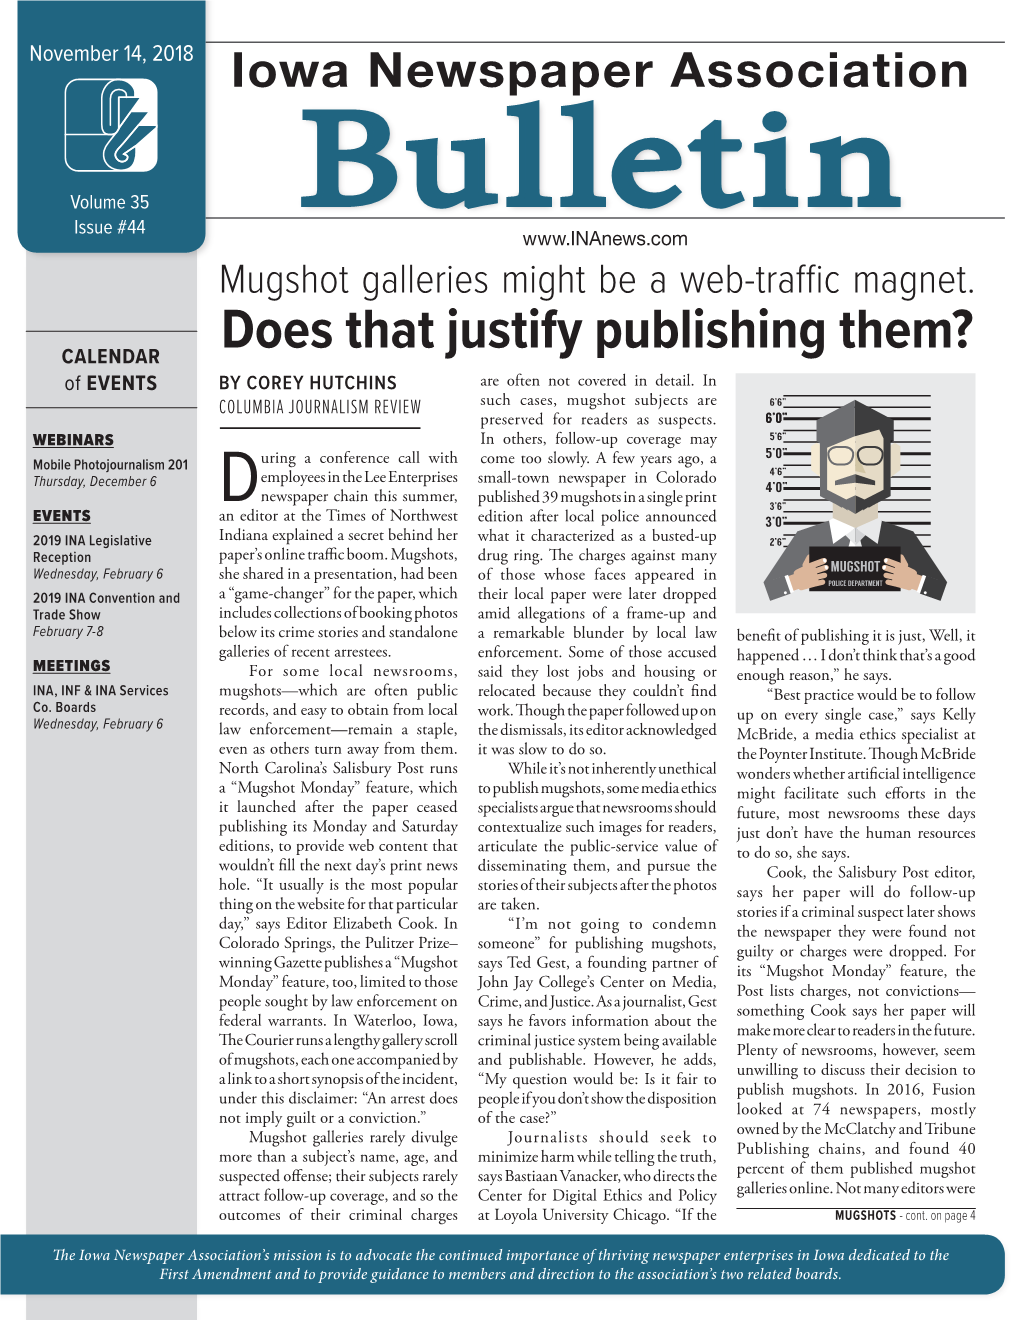 Does That Justify Publishing Them? of EVENTS by COREY HUTCHINS Are Often Not Covered in Detail